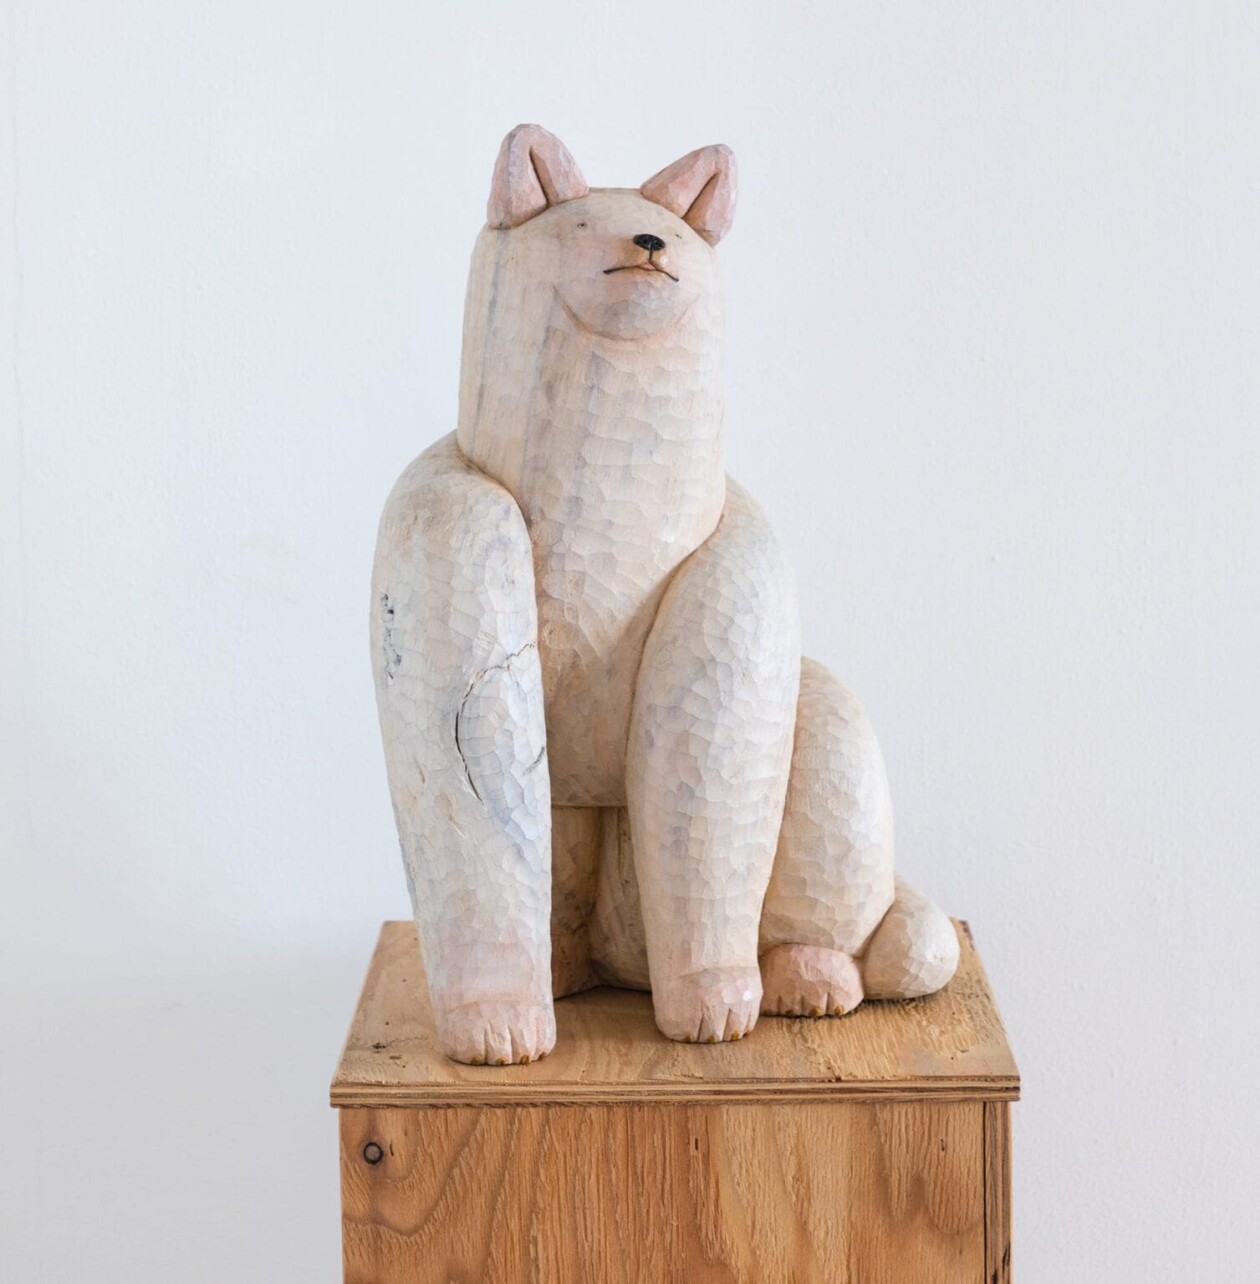 Misato Sano's Wooden Sculptures Bring Canine Companions To Life (12)